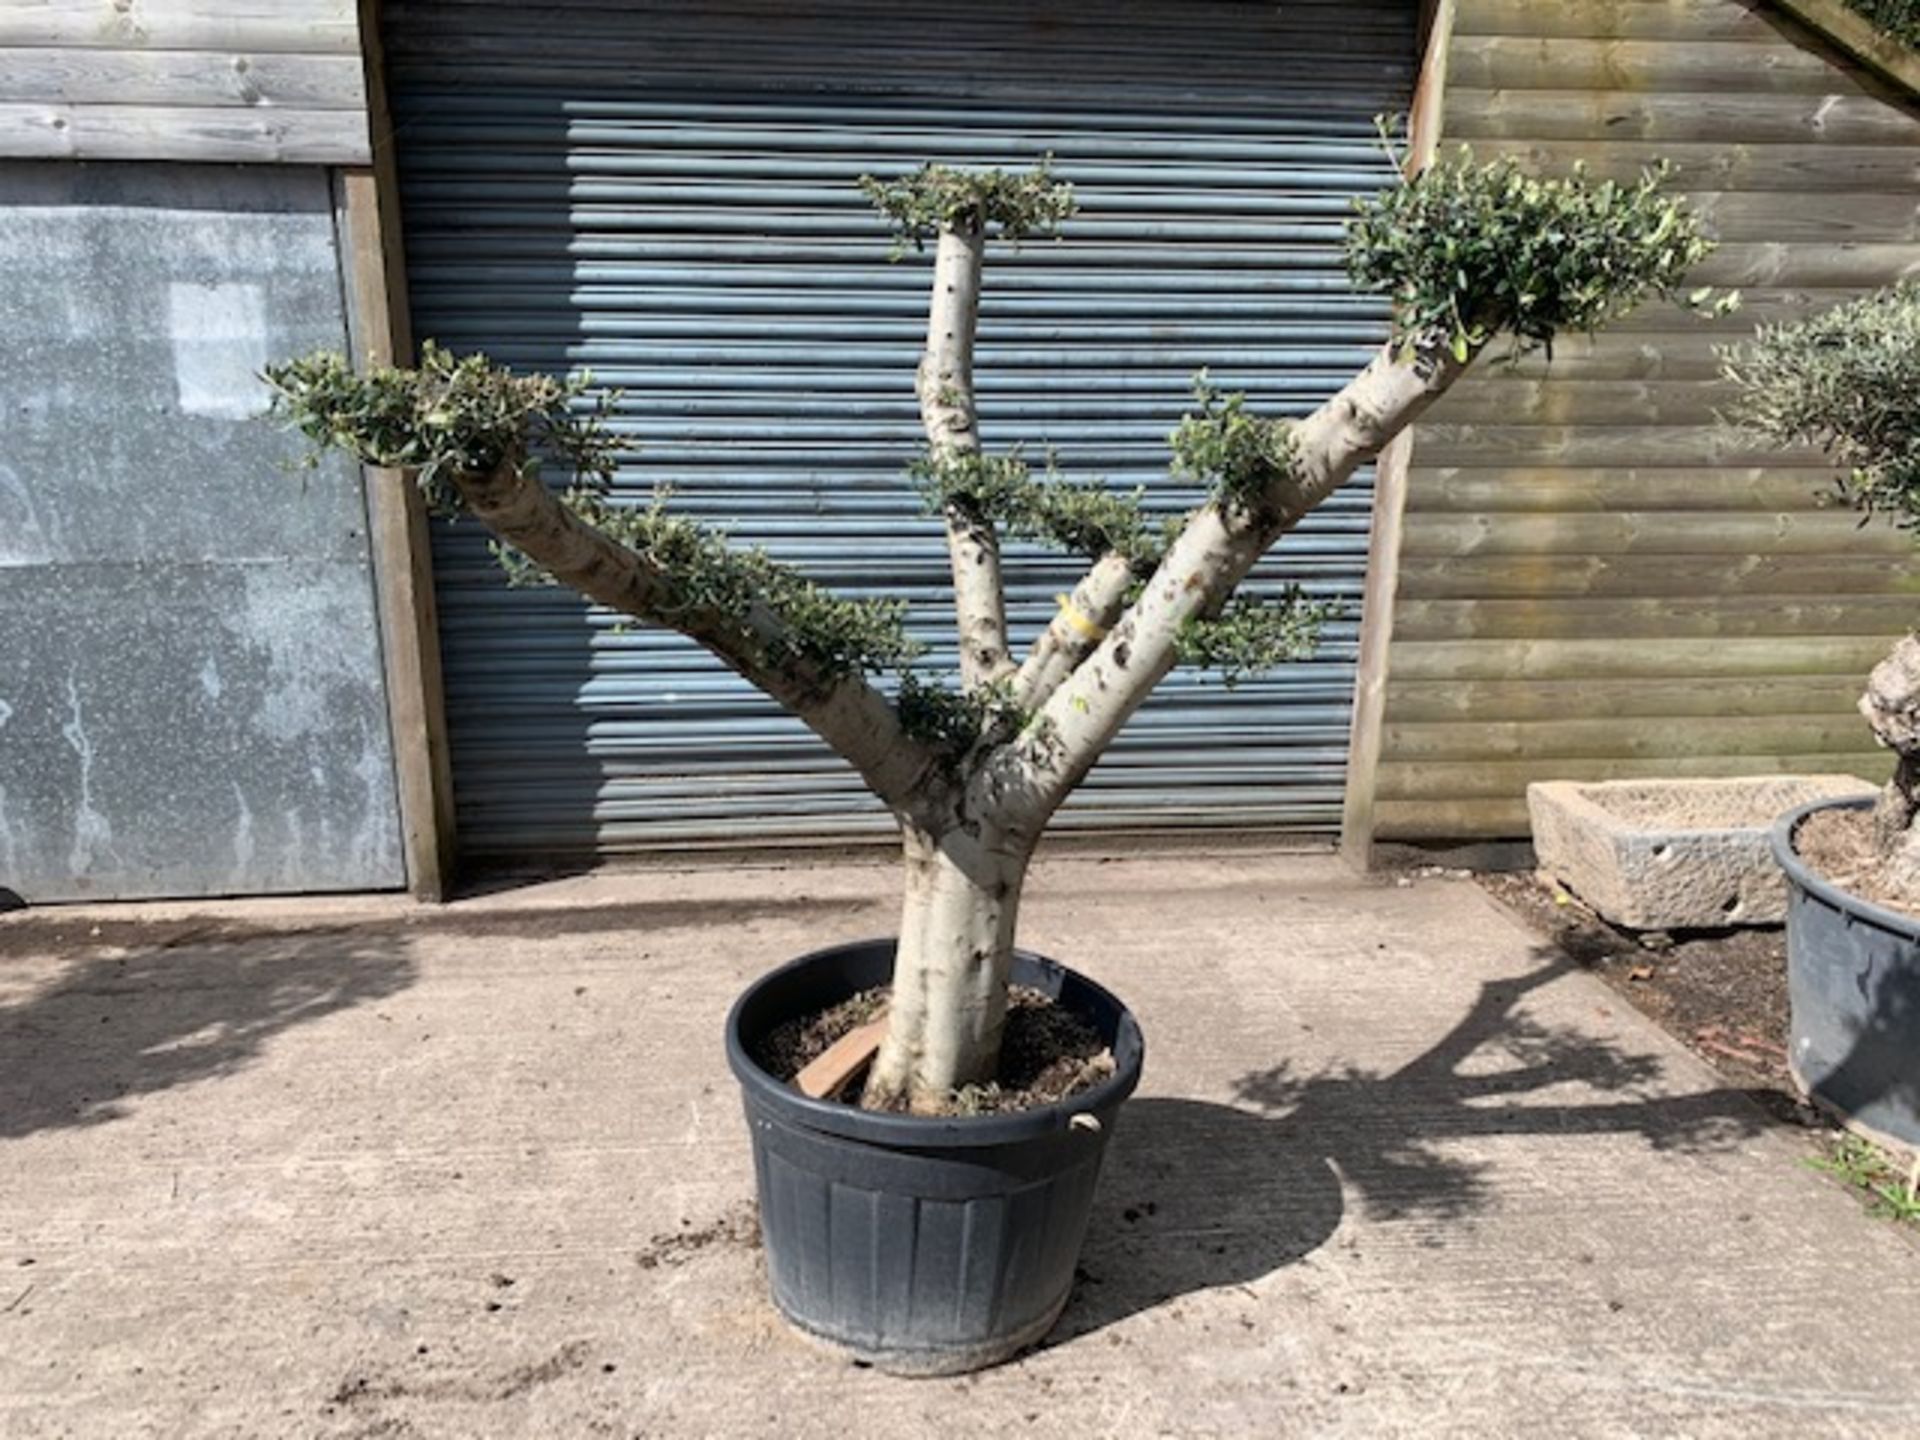 LARGE ORNATE 2M TALL YOUNG DECORATIVE BONSAI OLIVE TREE IN POT